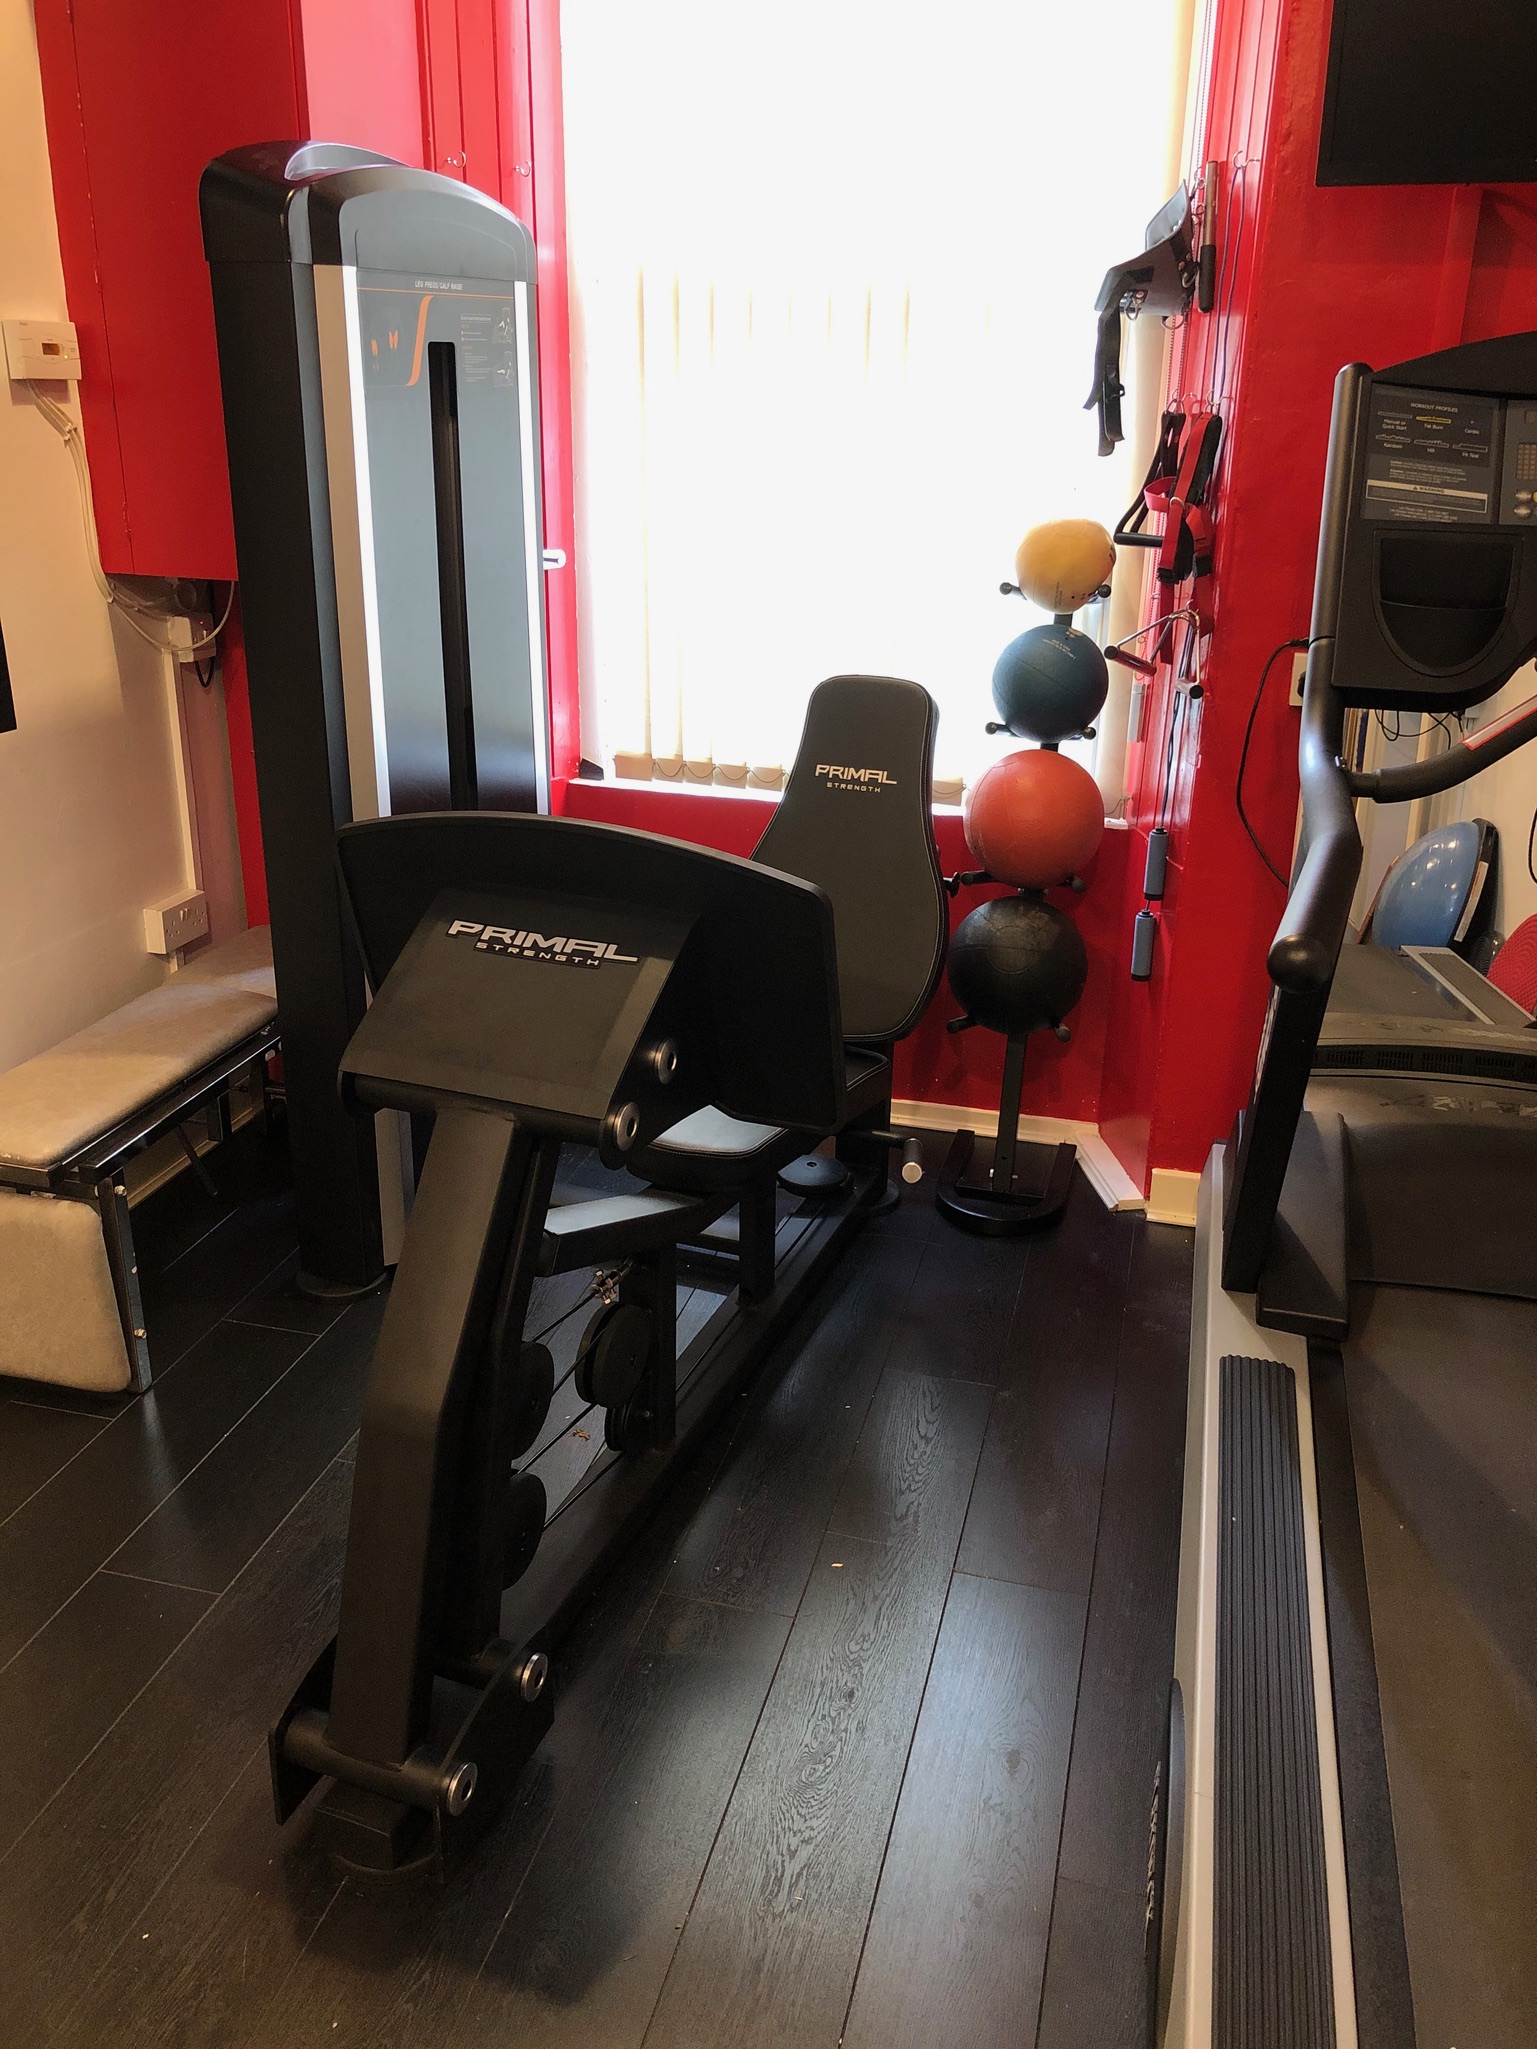 Exercise Equipment at Physis Physiotherapy